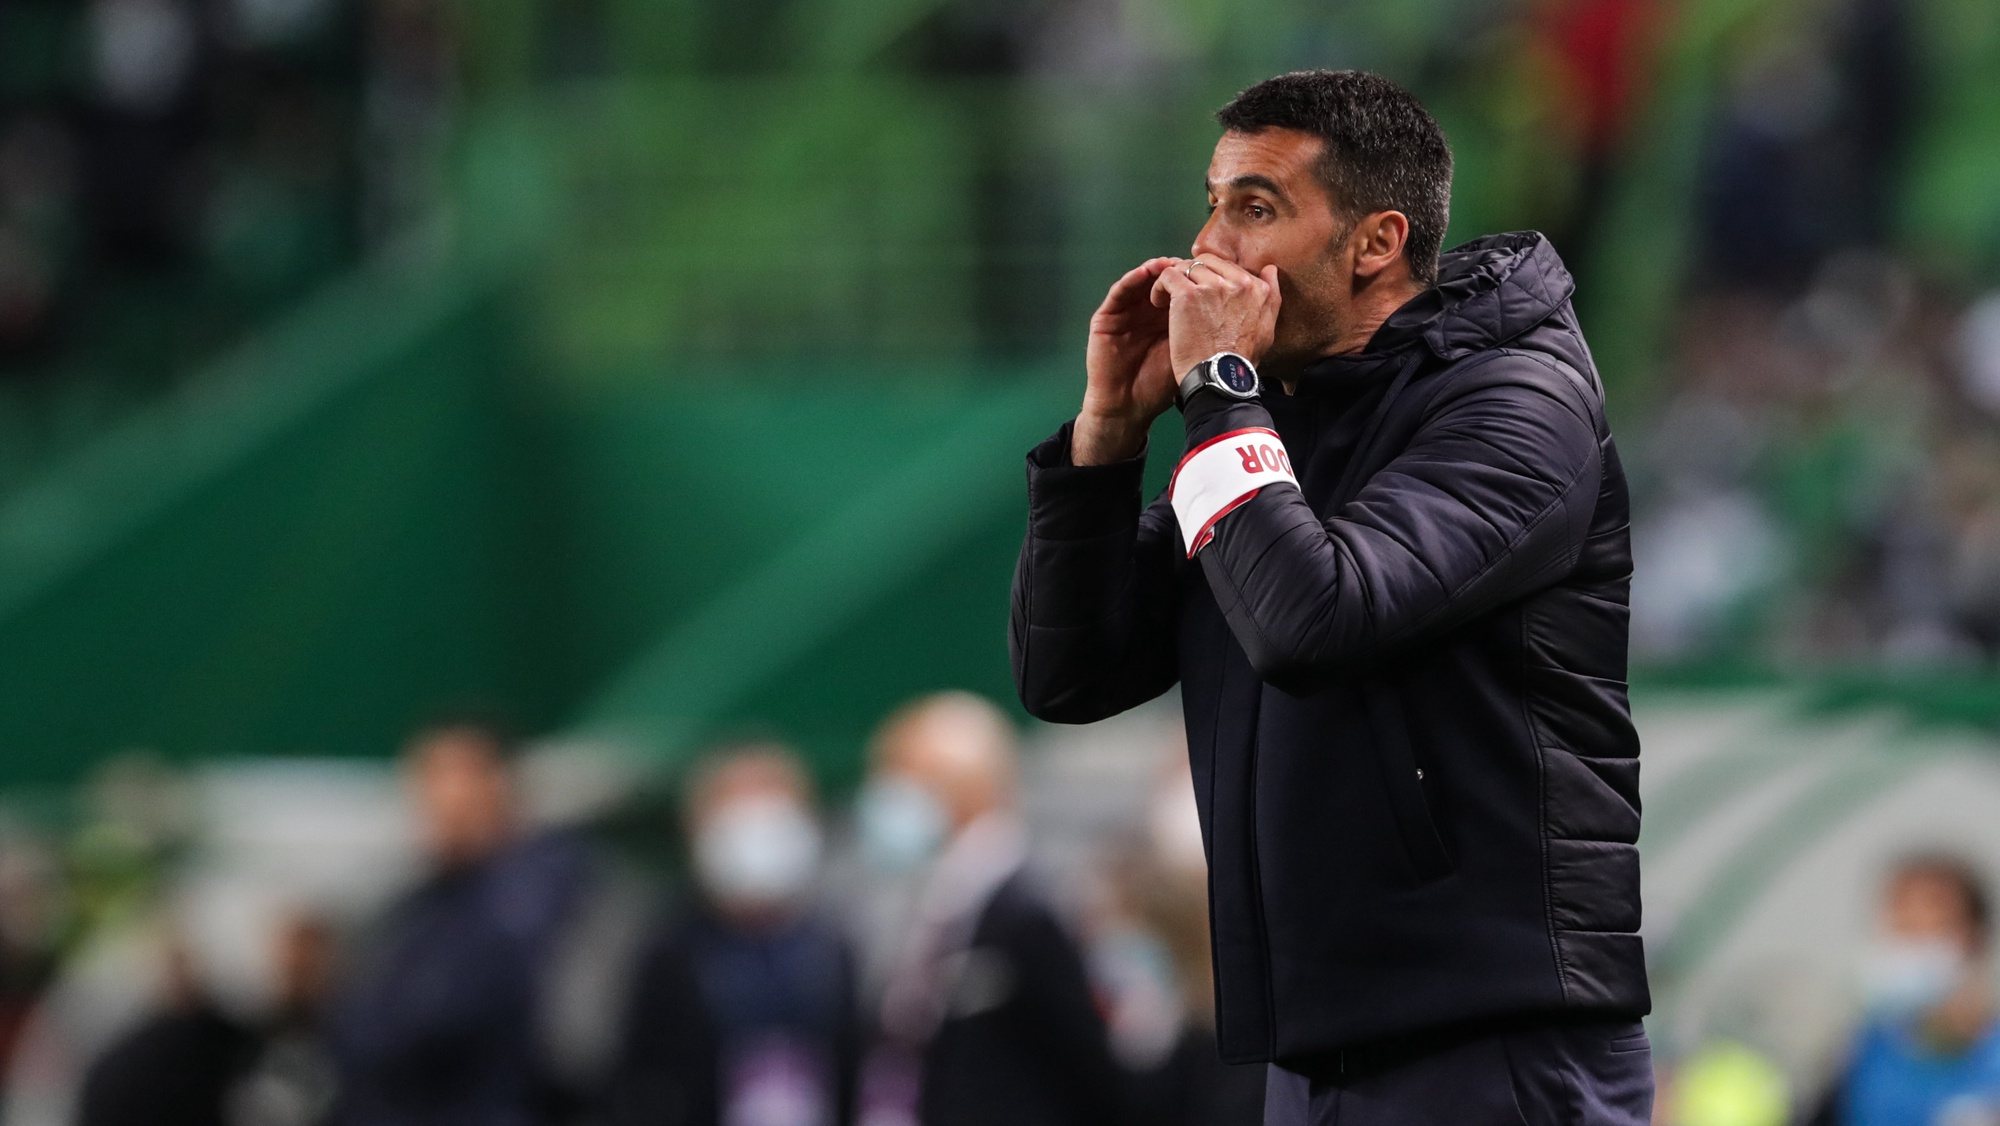 Benfica&#039;s head coach Nelson Verissimo reacts during the Portuguese First League soccer match, between Sporting and Benfica, held on Alvalade stadium in Lisbon, Portugal, 17 April 2022. TIAGO PETINGA/LUSA